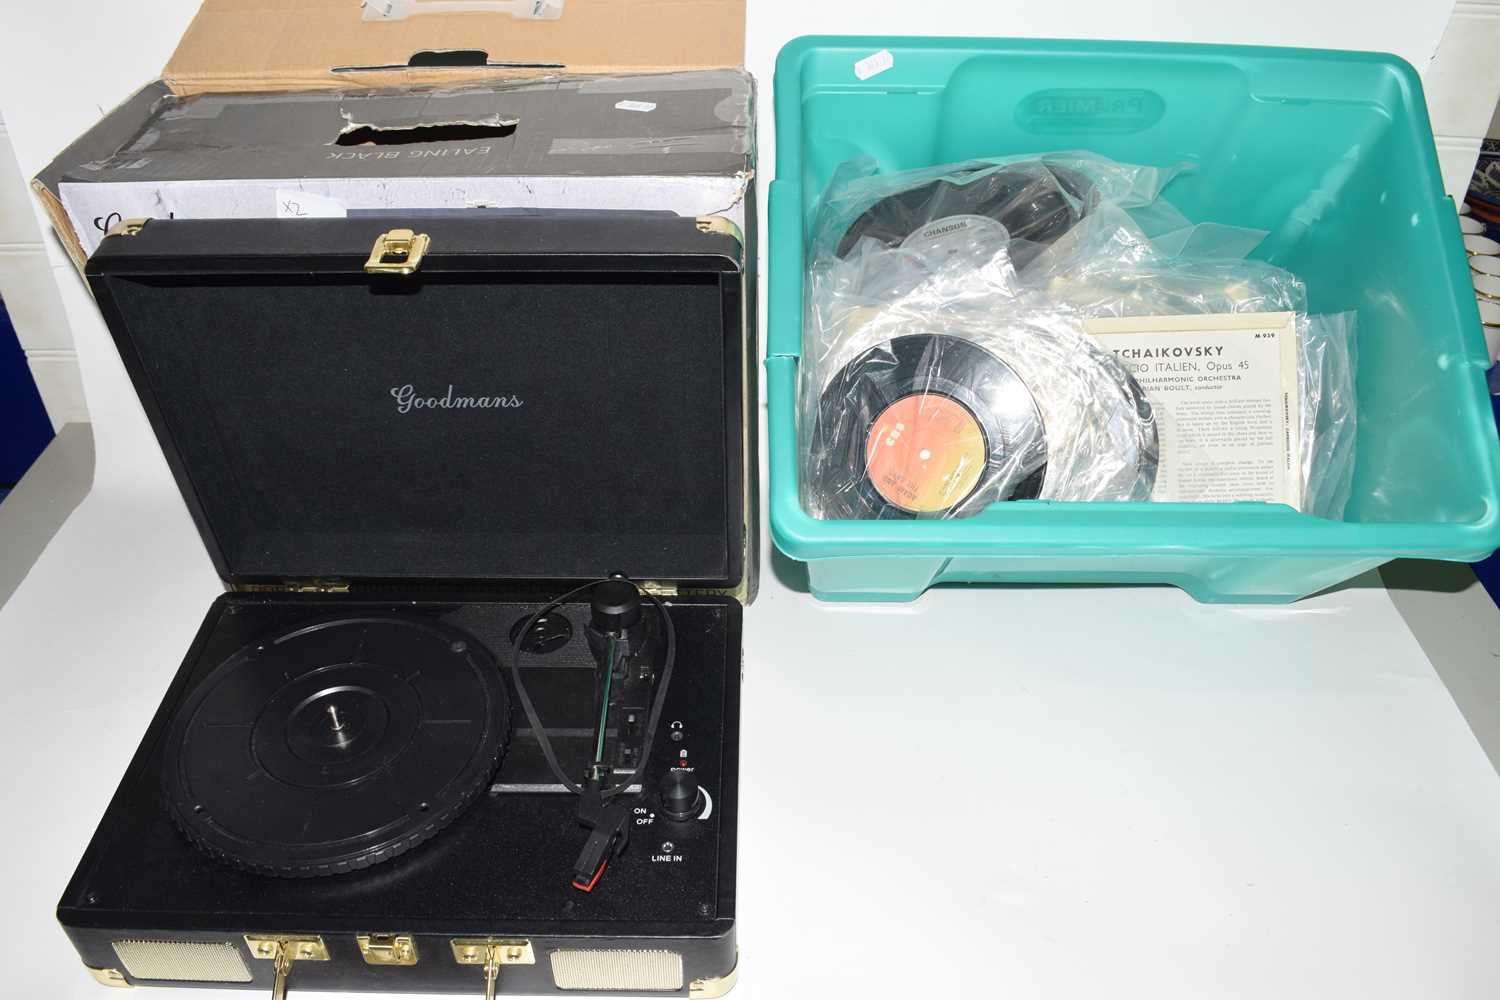 Modern portable Goodmans turntable and box of assorted singles